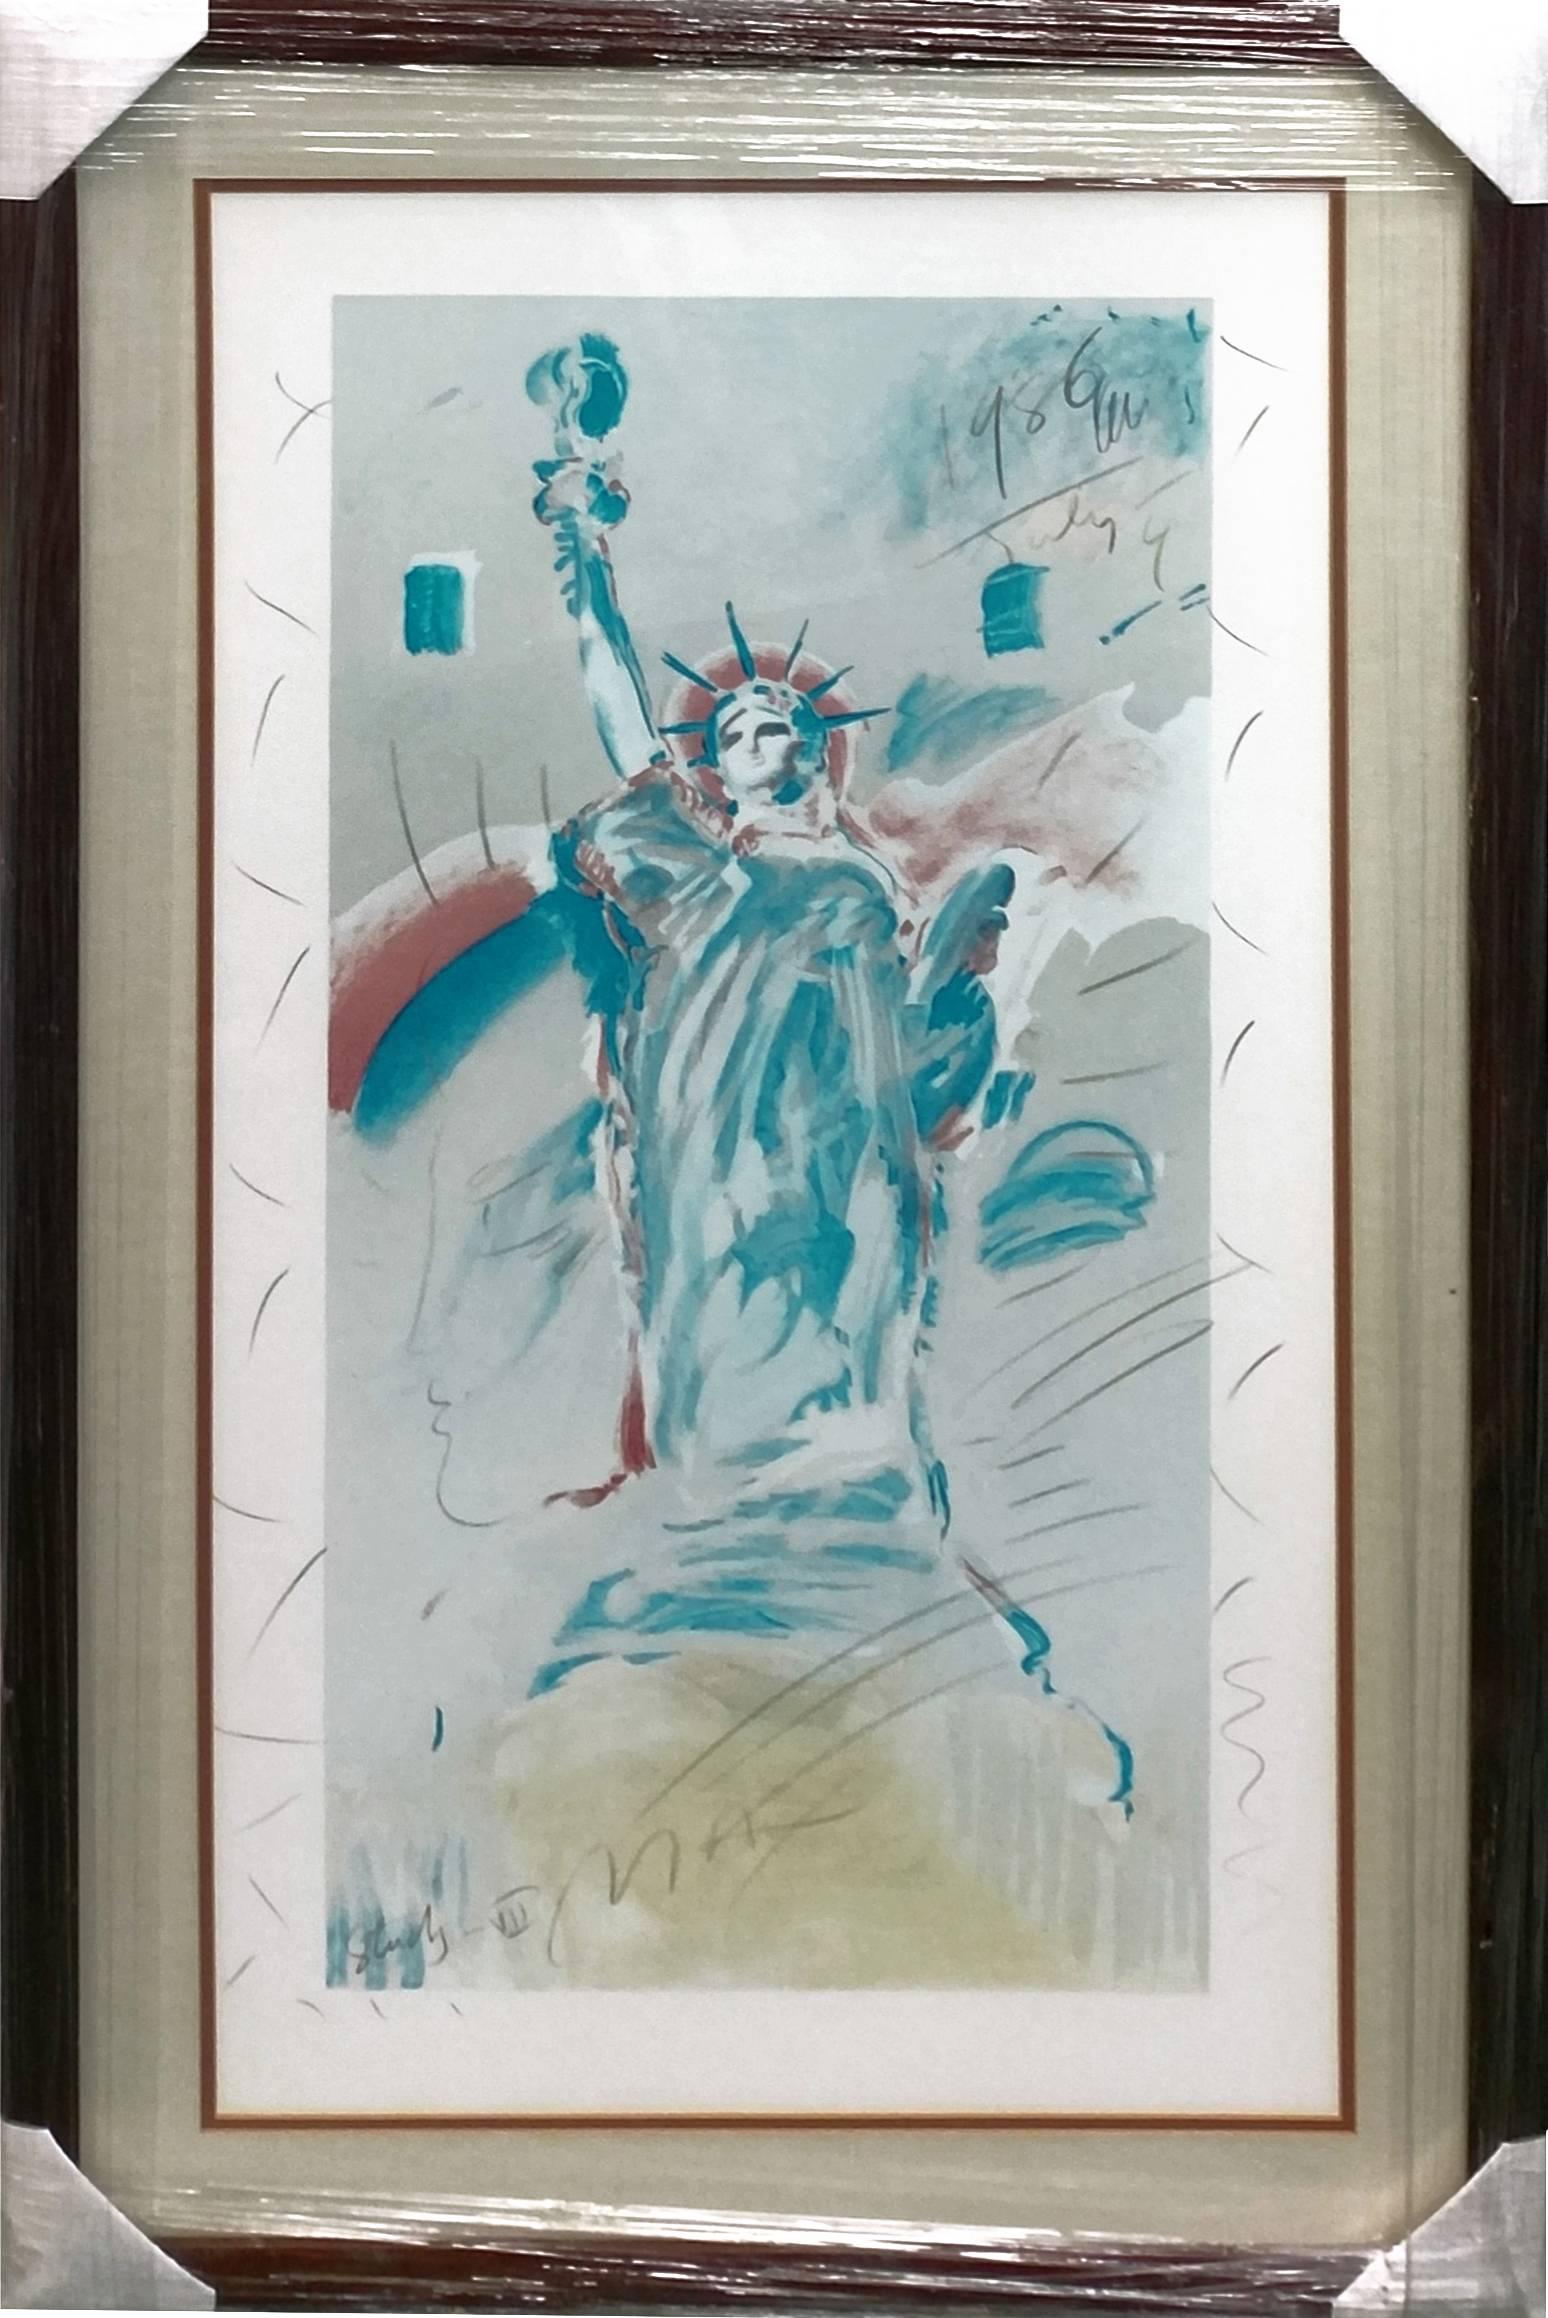 STATUE OF LIBERTY - Print by Peter Max